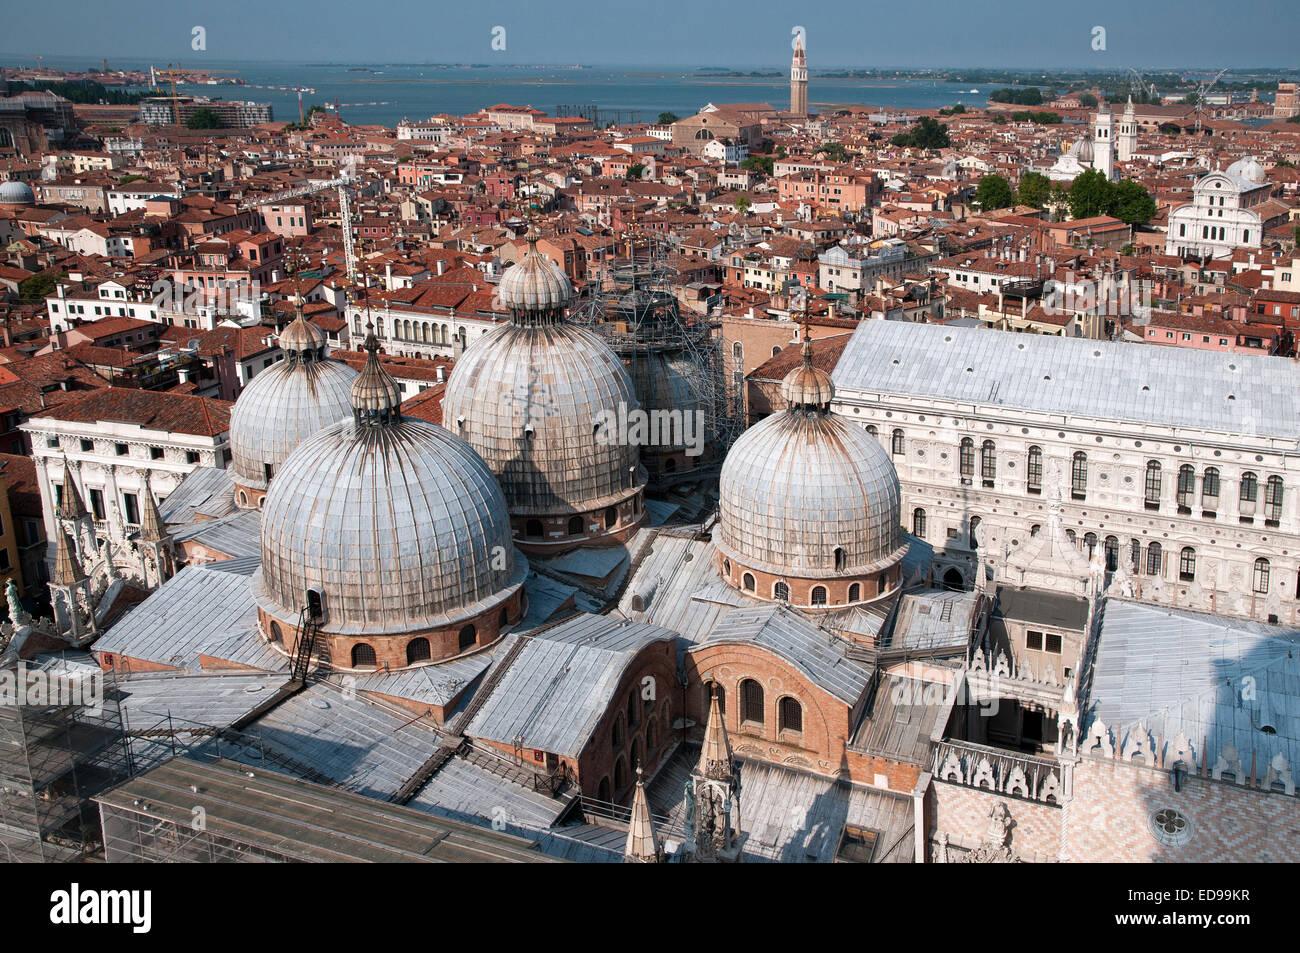 Domes of Basilica di San Marco St Marks and part of Doges Palace seen from top of St Marks Bell Tower Venice Italy DOMES BASILIC Stock Photo